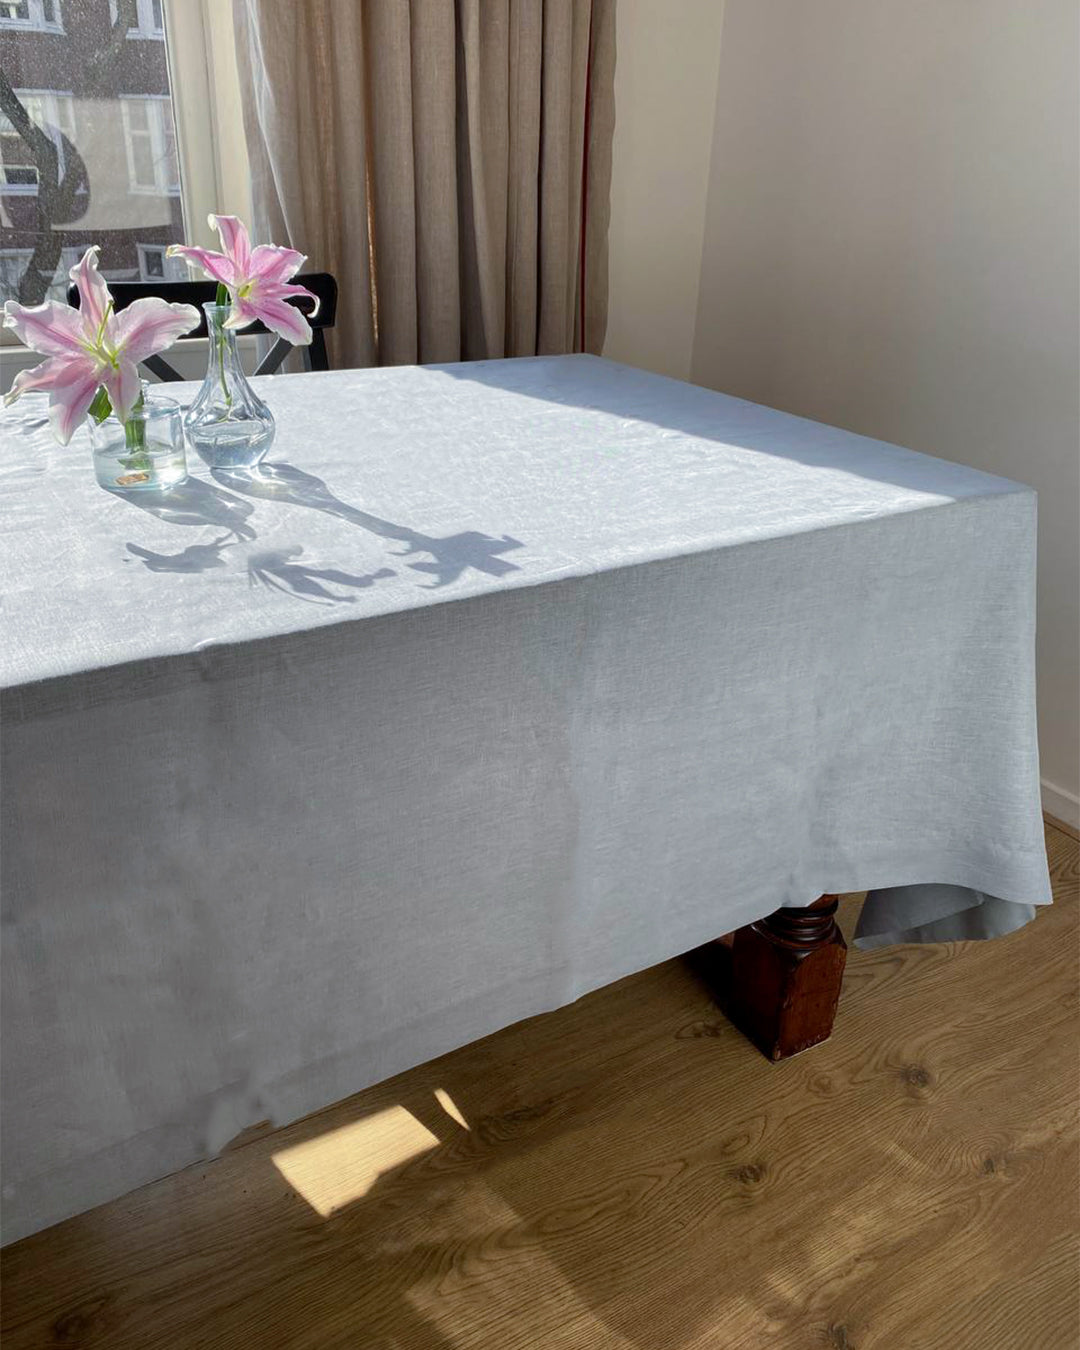 Tablecloth from soft linen in dusty blue